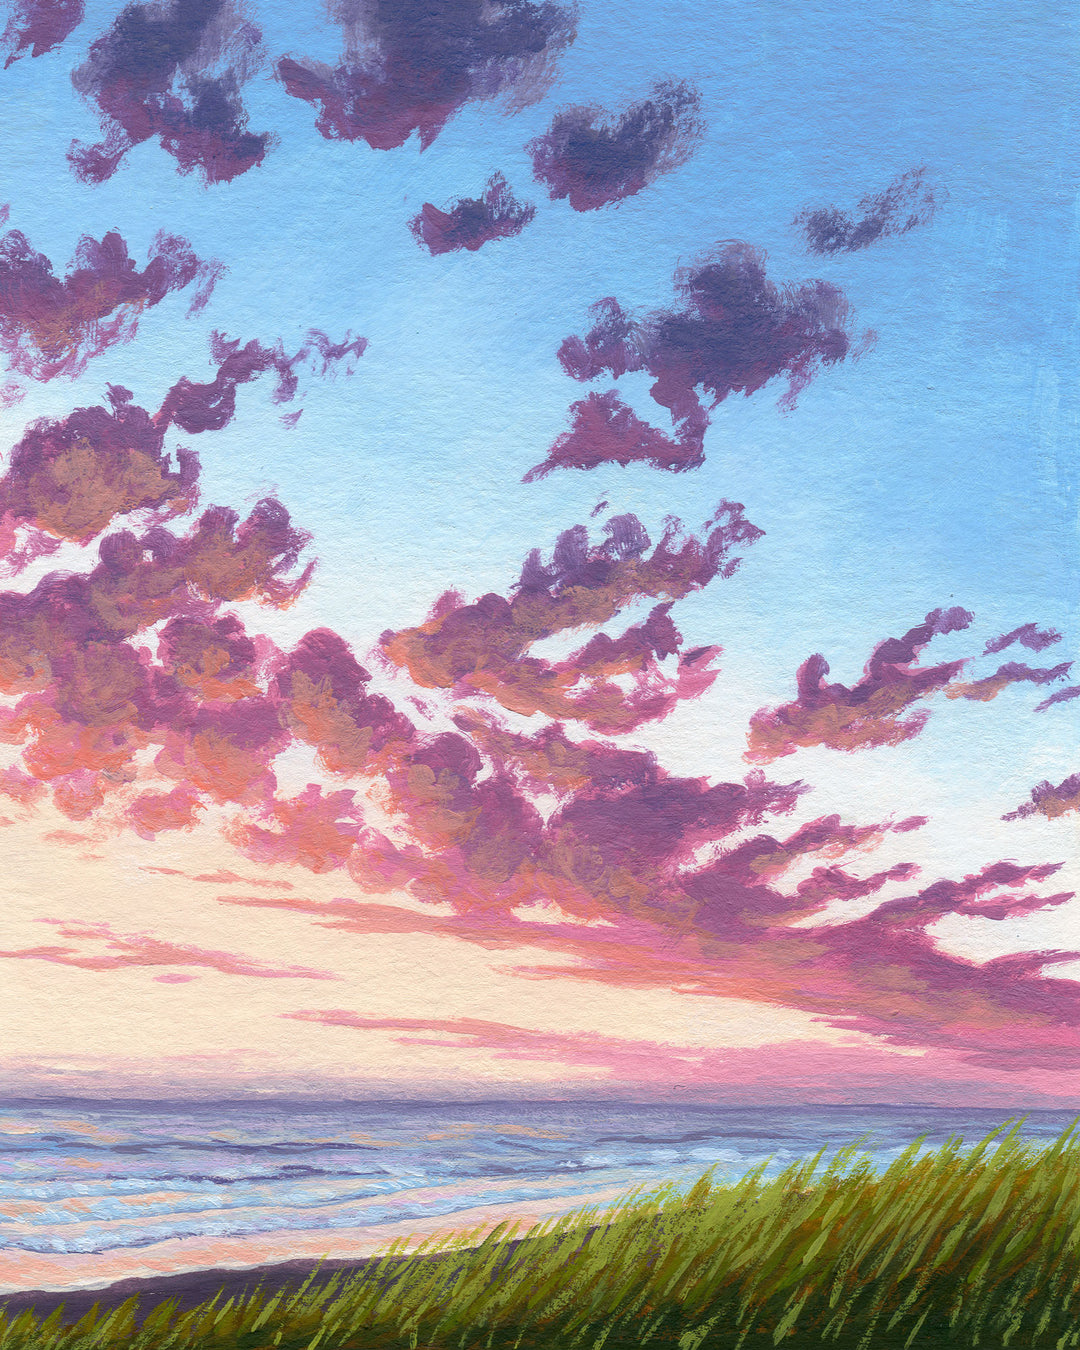 A vertical painting of a colorful sunset over the beach. Dune grass in the foreground.